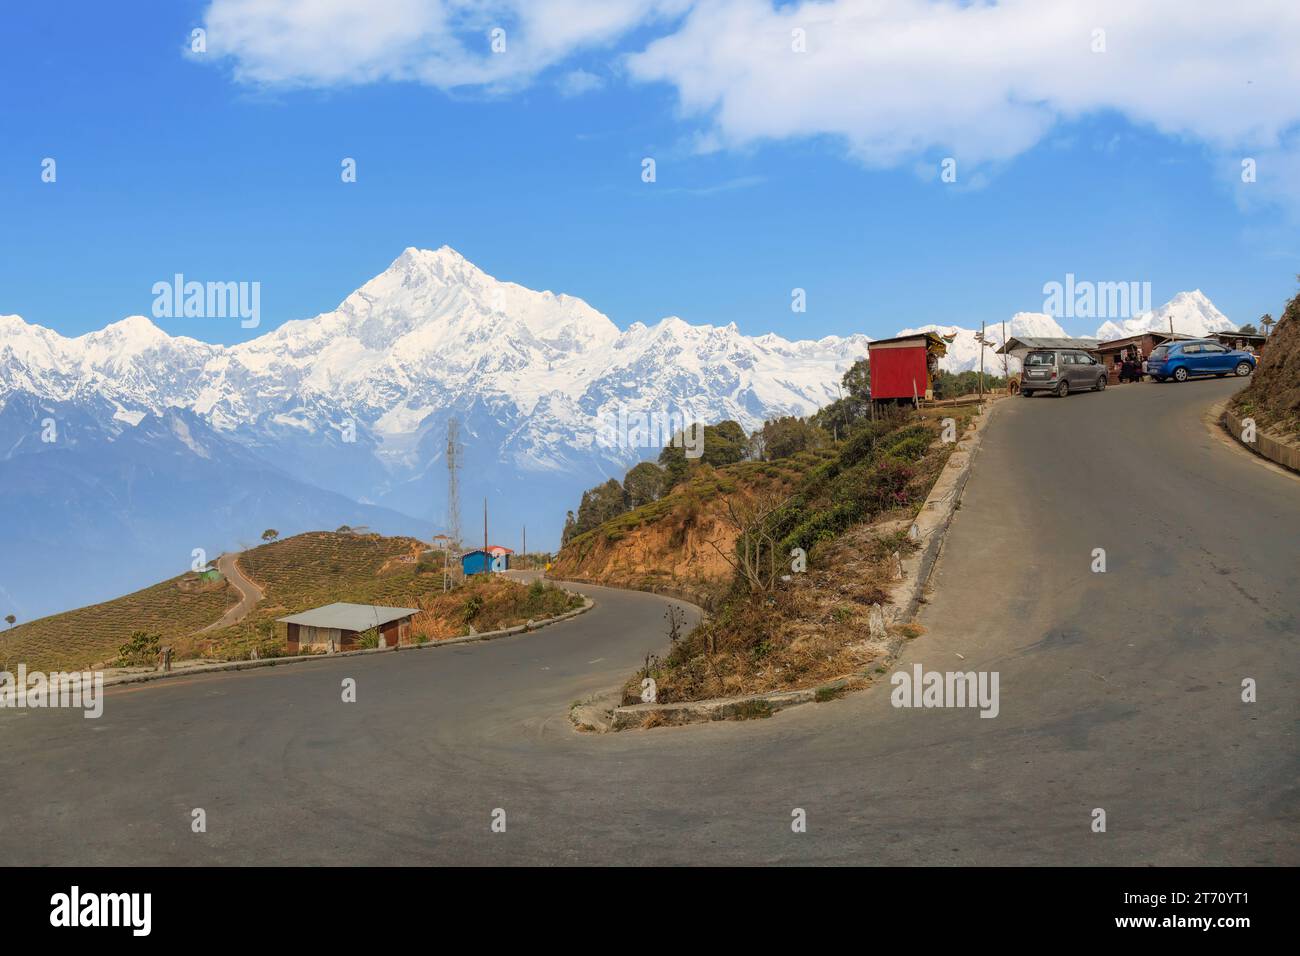 Mountain highway road with scenic Himalayan landscape and view of the Kanchenjunga Himalaya range on way to Tinchuley, Darjeeling, India. Stock Photo